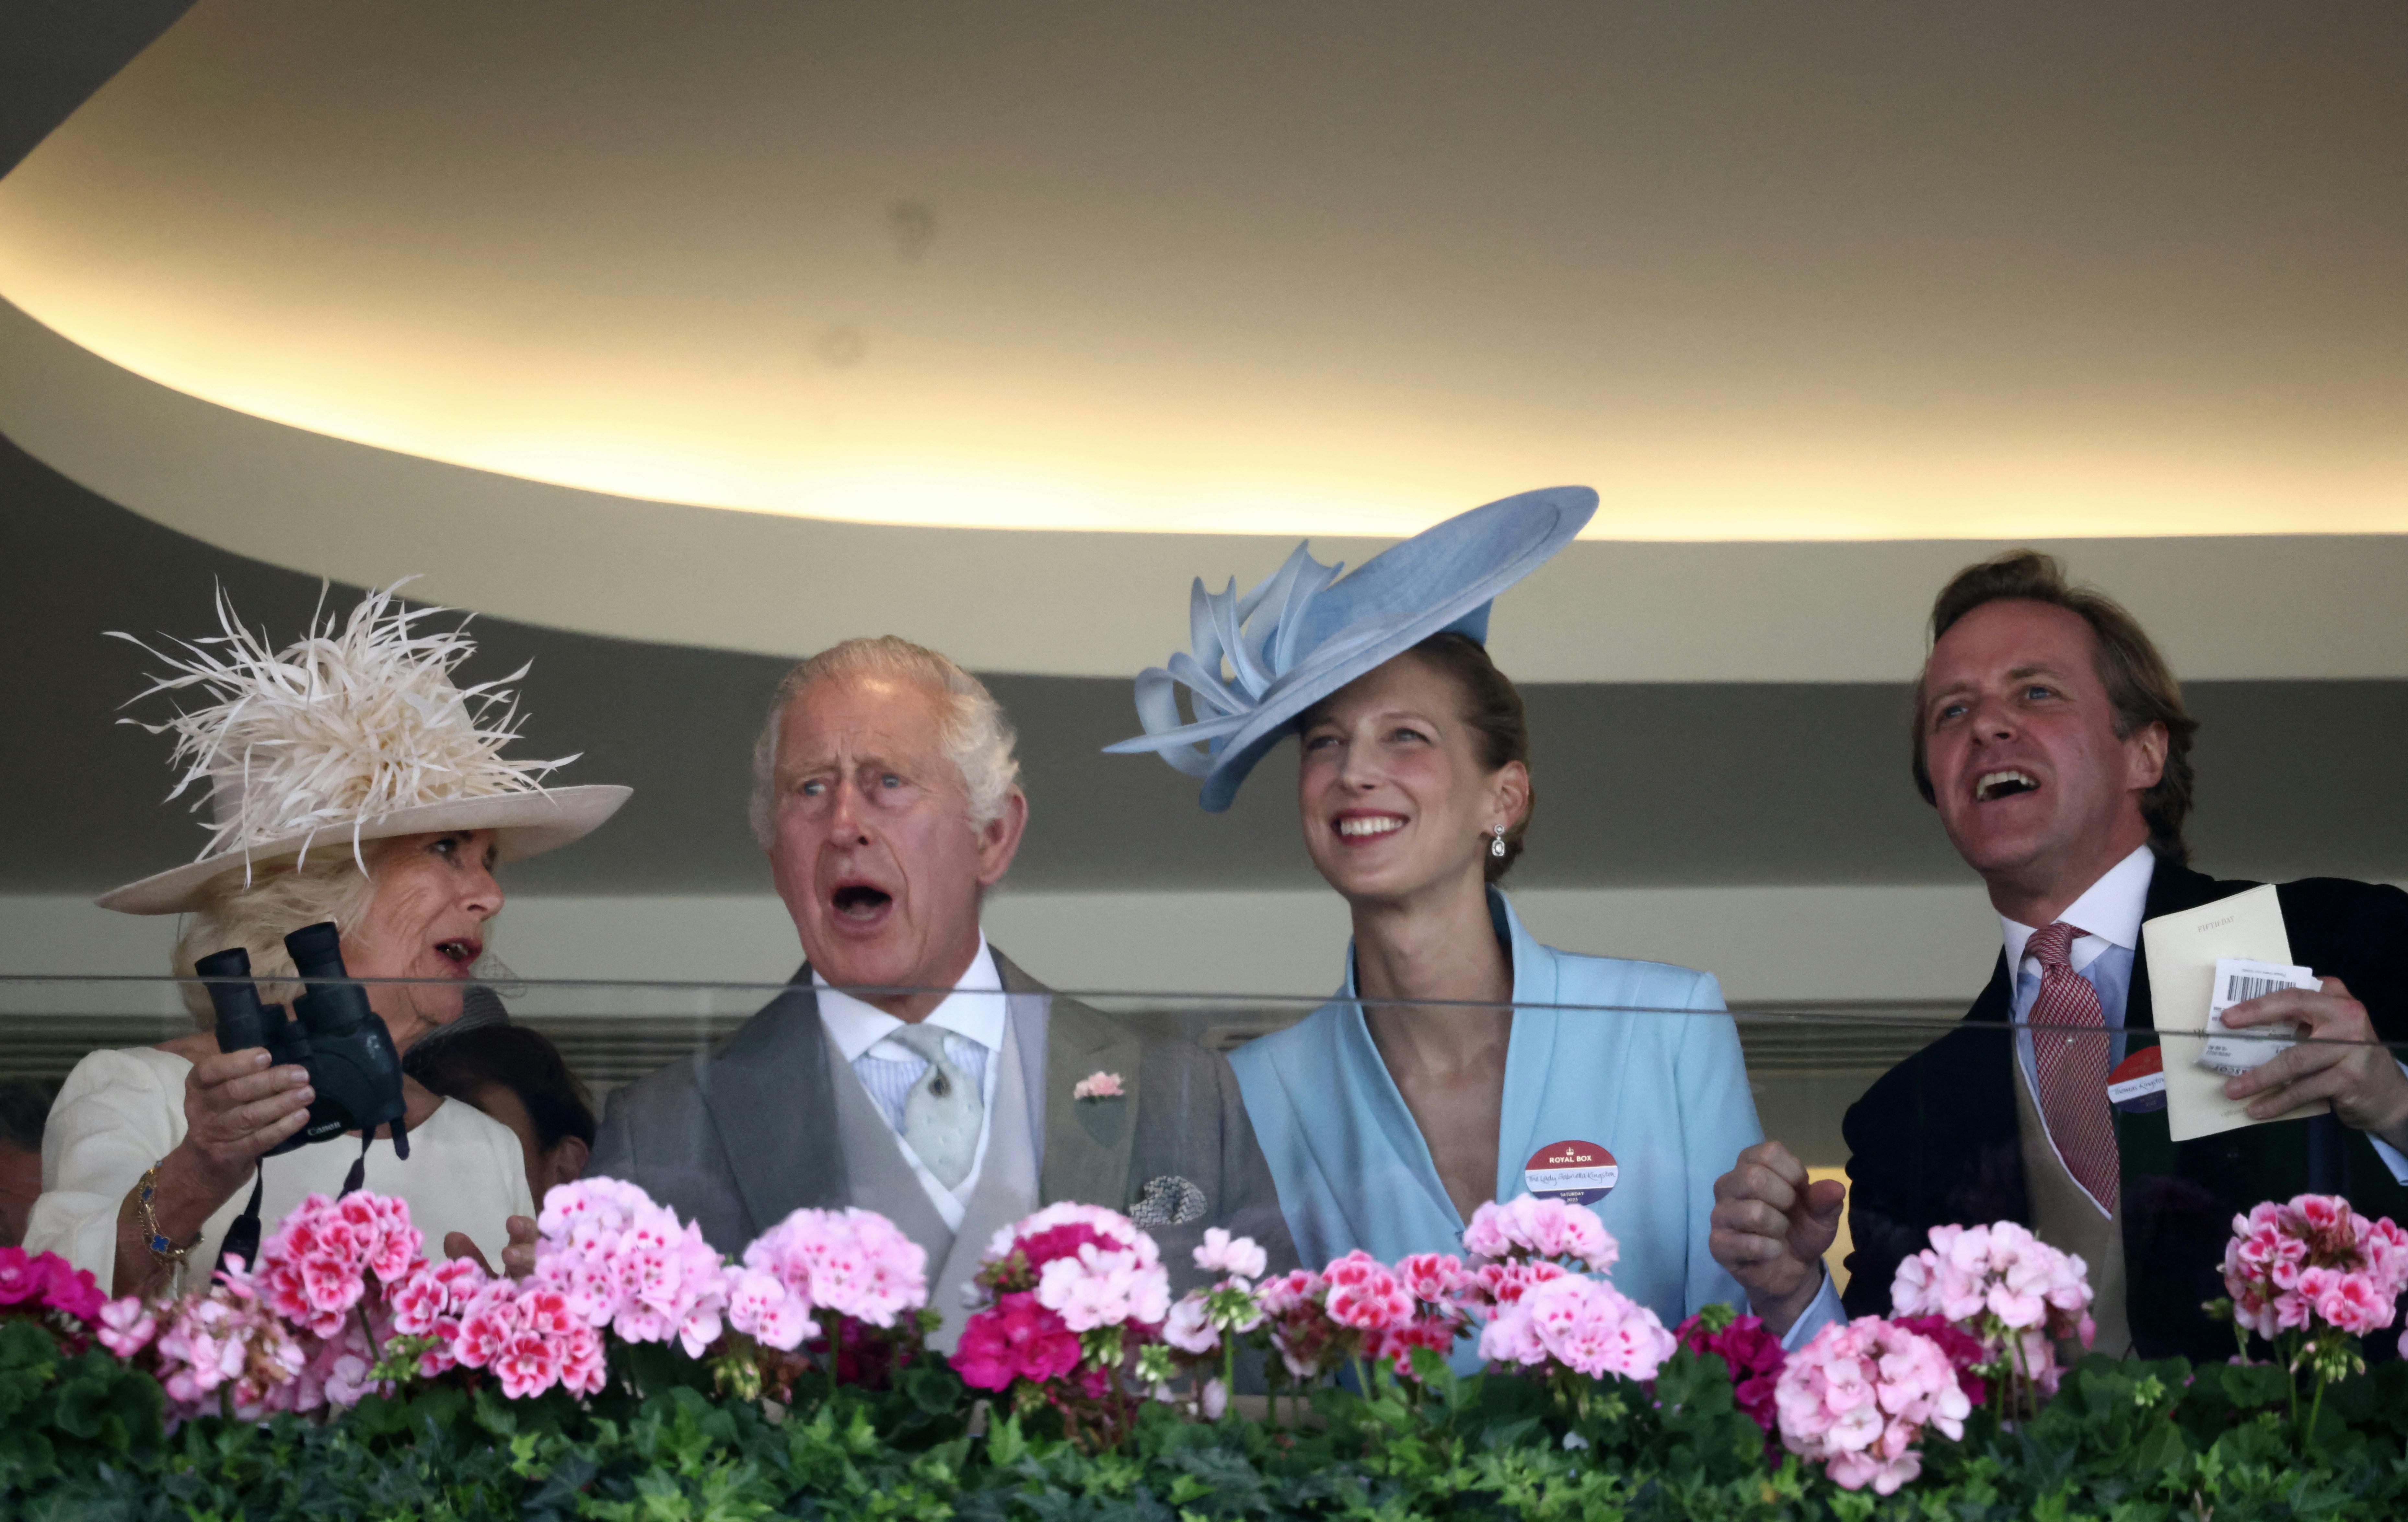 Britain's King Charles III (2L), Britain's Queen Camilla (L), Lady Gabriella Kingston (2R) and Thomas Kingston (R) watch the Wokingham handicap from the Royal Box on the final day of the Royal Ascot horse racing meeting in Ascot, west of London, on June 24, 2023. HENRY NICHOLLS / AFP